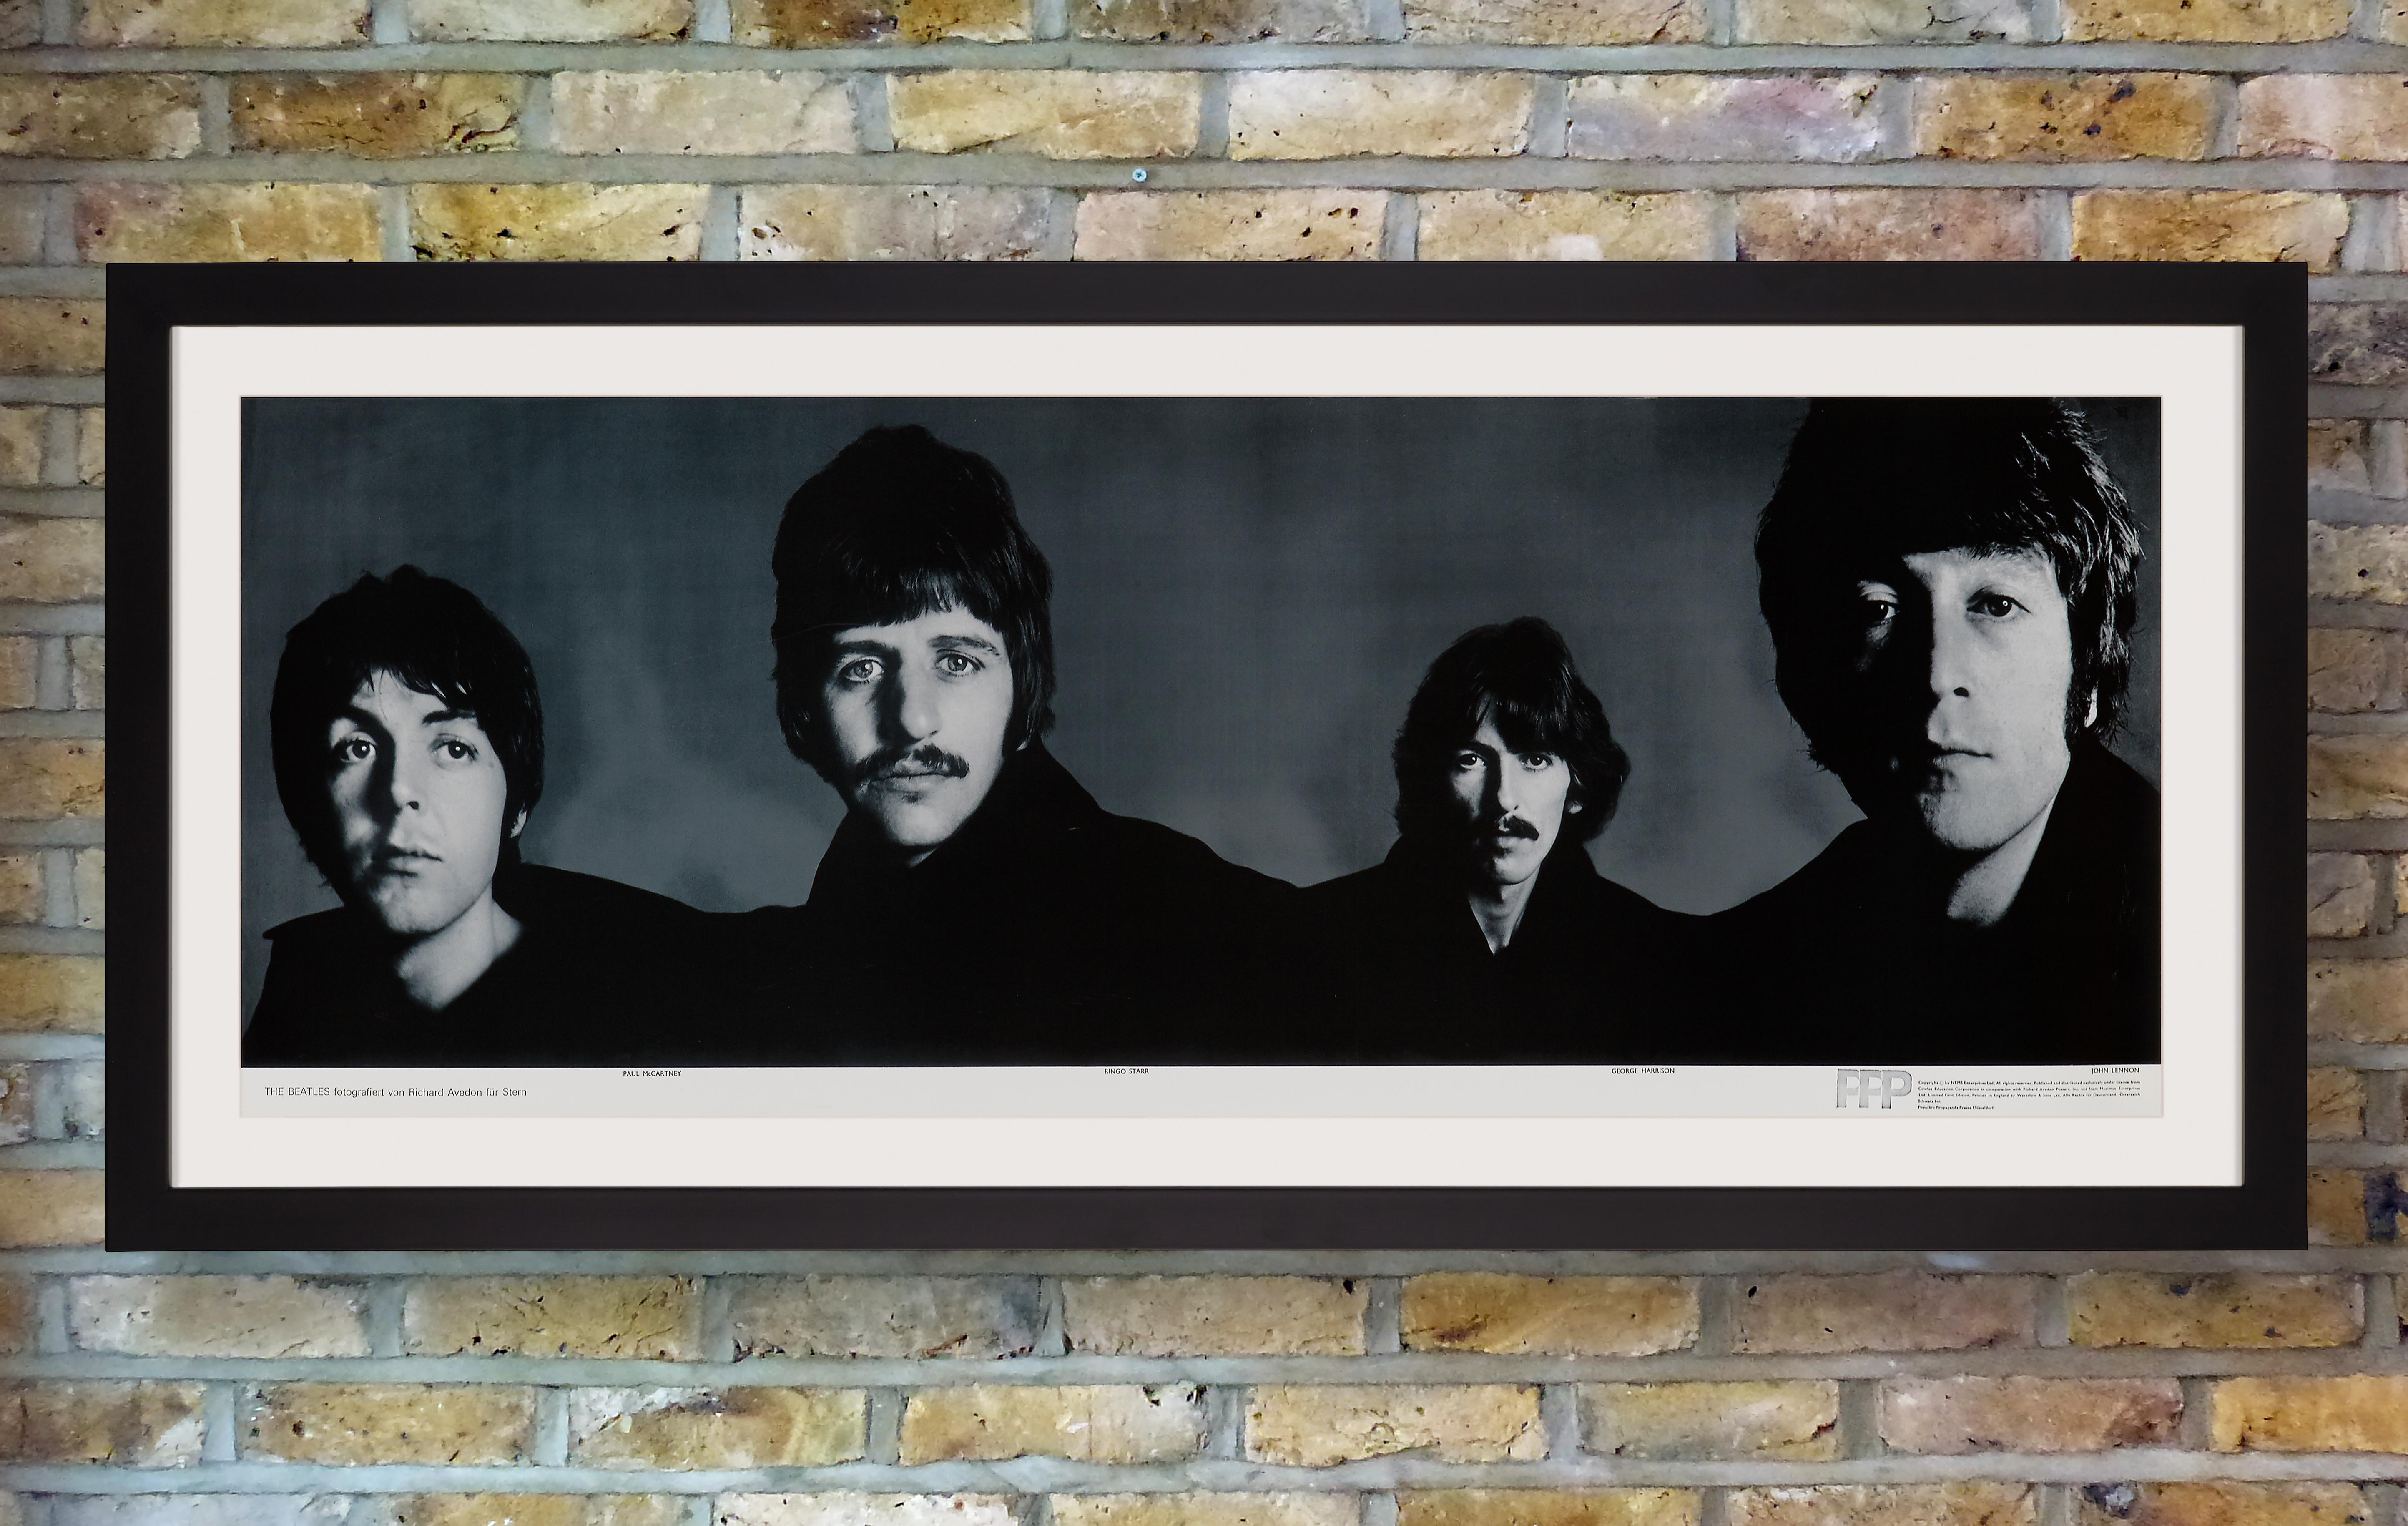 'The Beatles' Complete Set of Five Promotional Posters by Richard Avedon, 1967 In Good Condition For Sale In Devon, GB